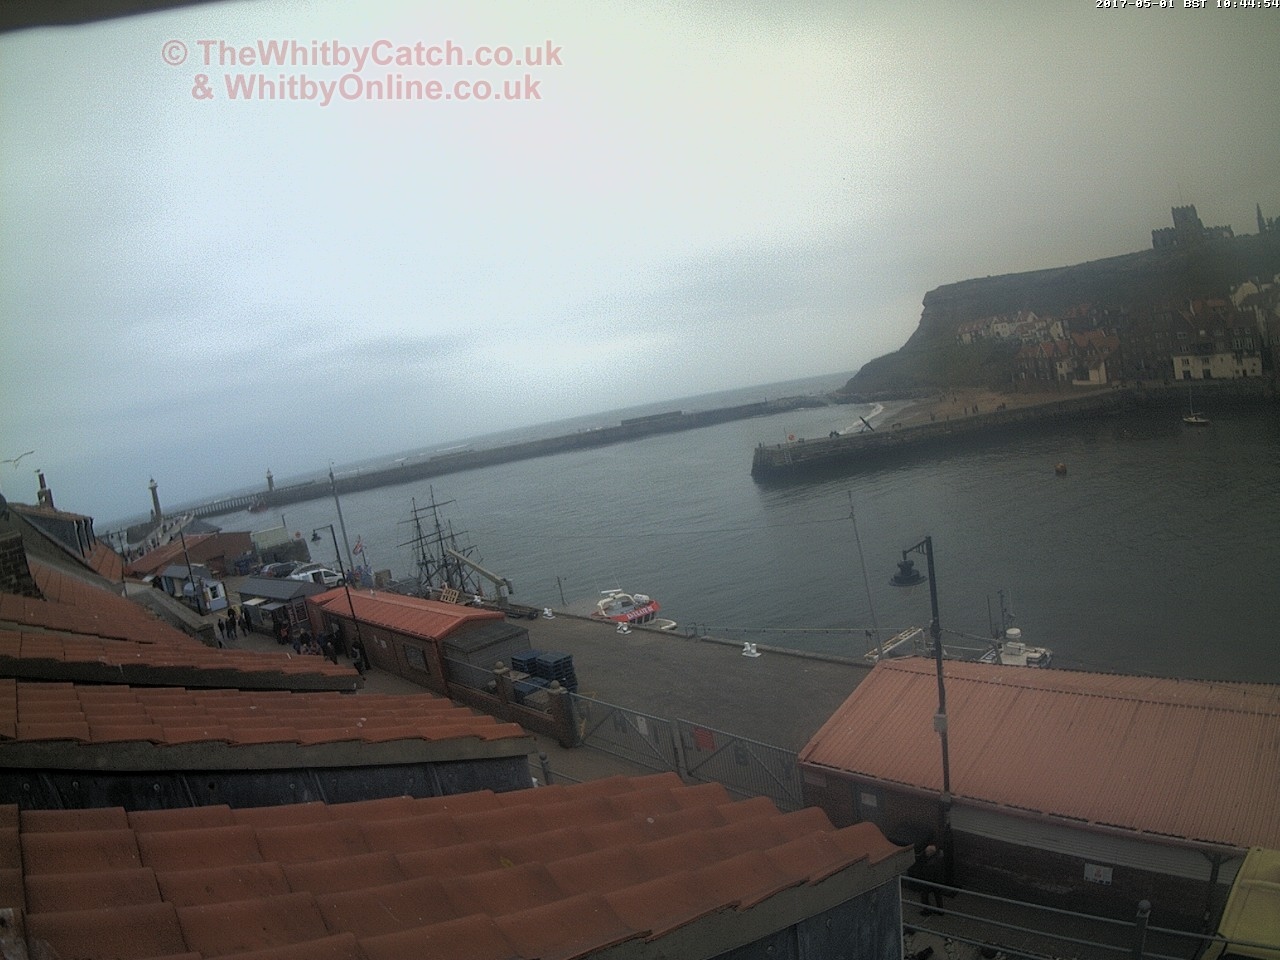 Whitby Mon 1st May 2017 10:45.